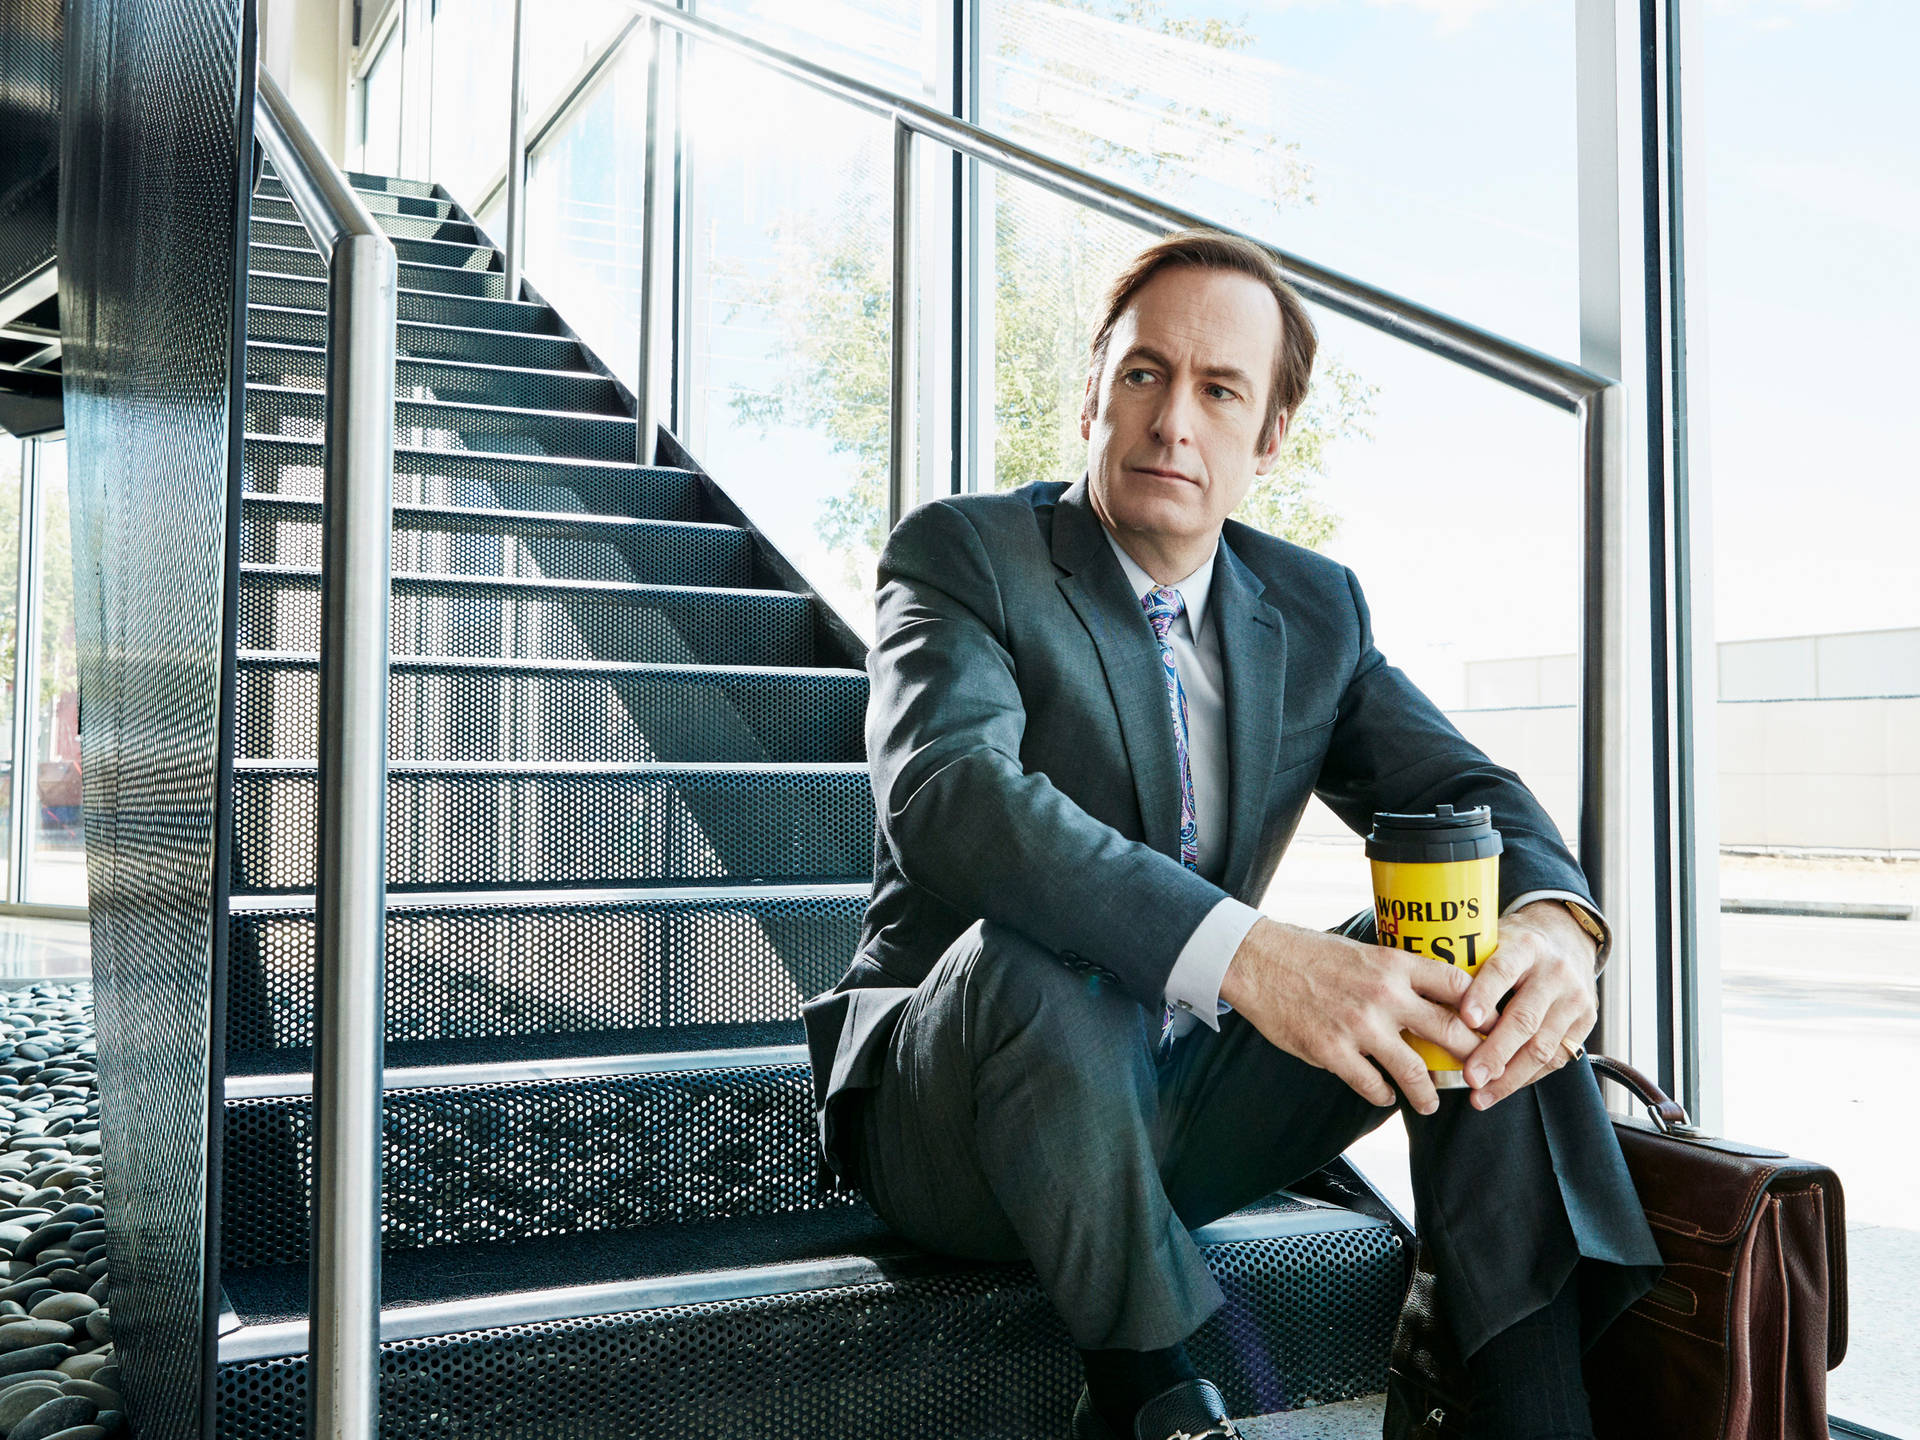 Jimmy Mcgill Descending A Staircase In Better Call Saul Background